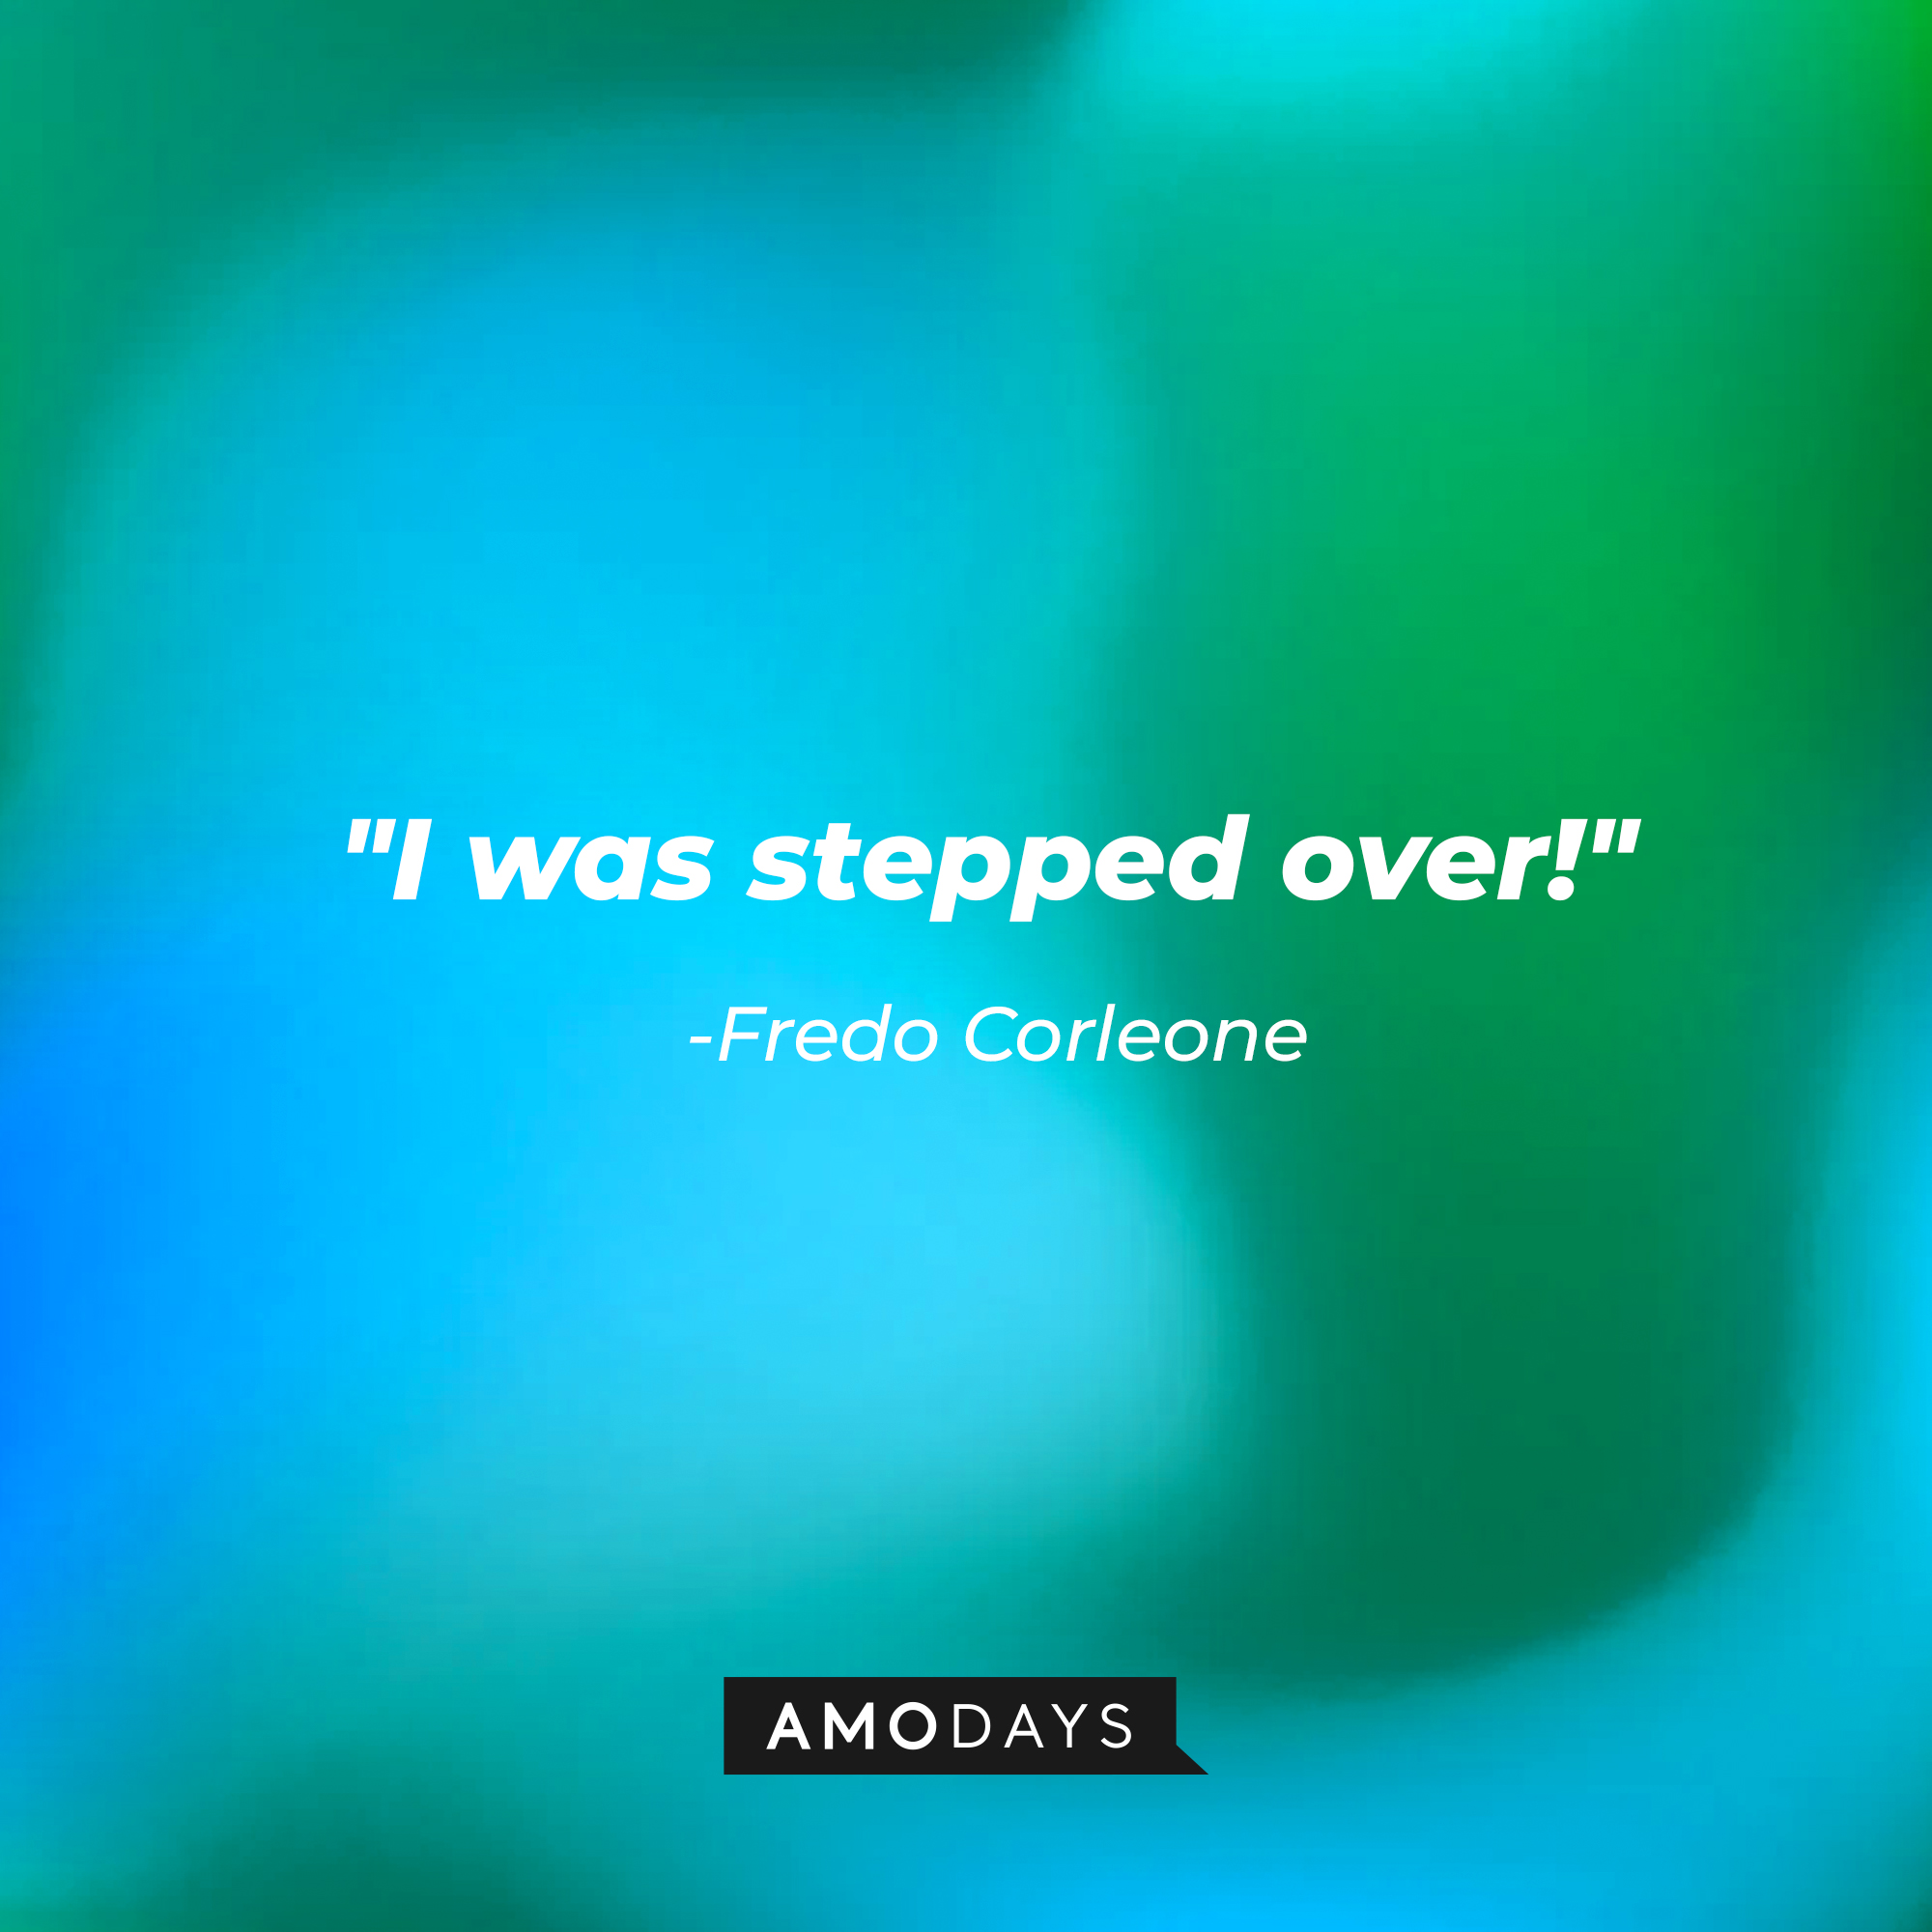 Fredo Corleone’s quote: "I was stepped over!" | Source: AmoDays